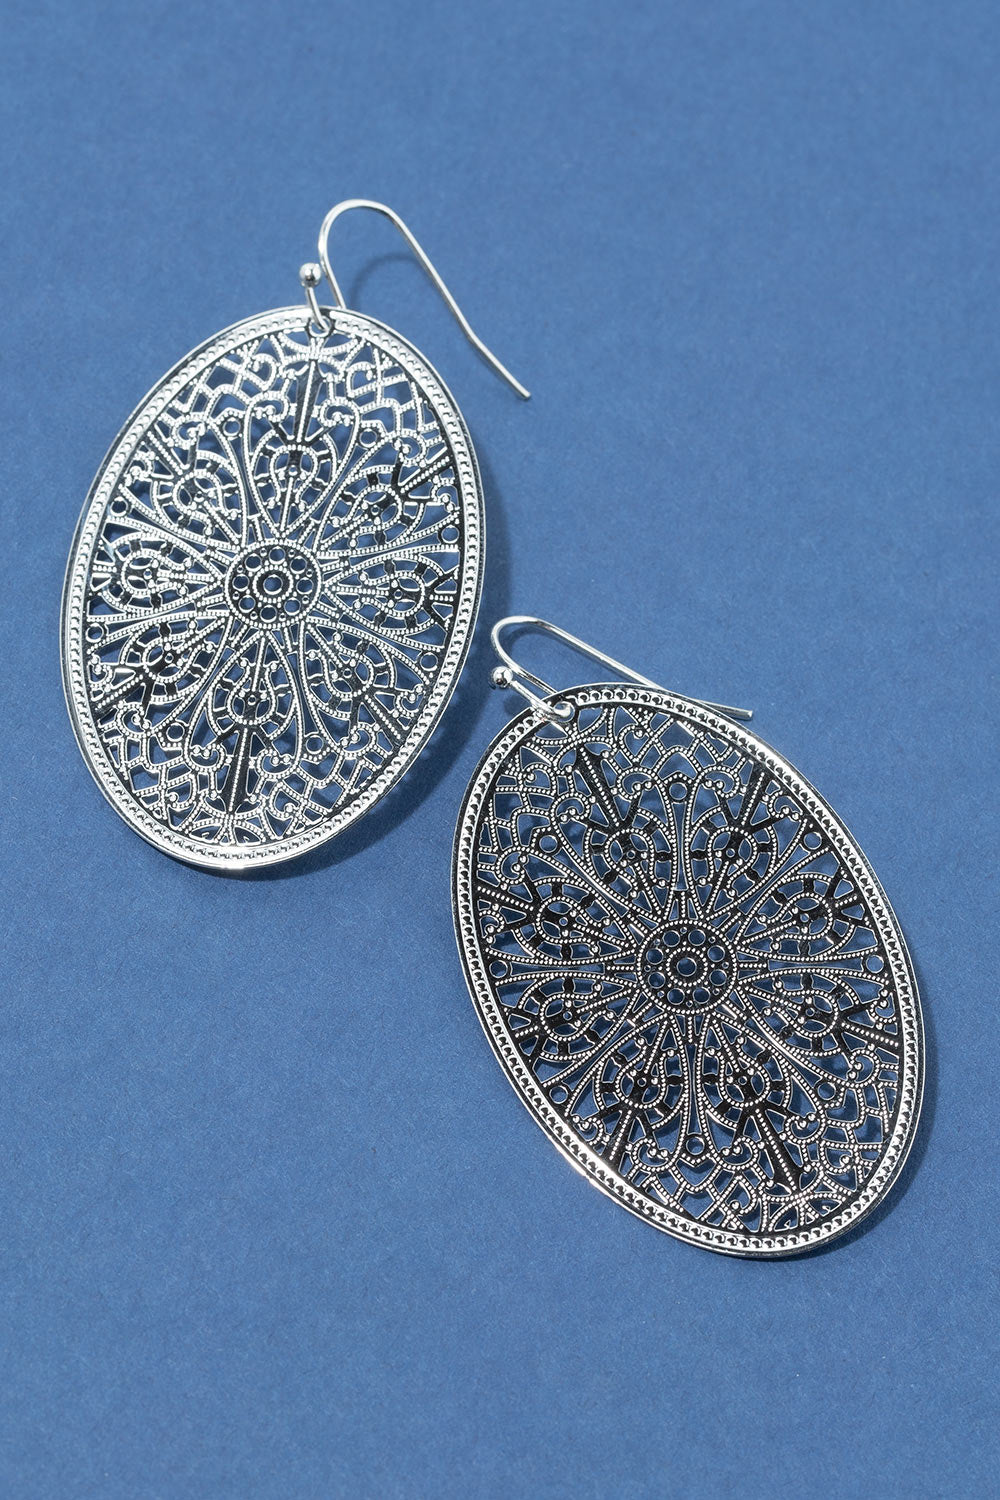 Type 2 Cathedral Earrings